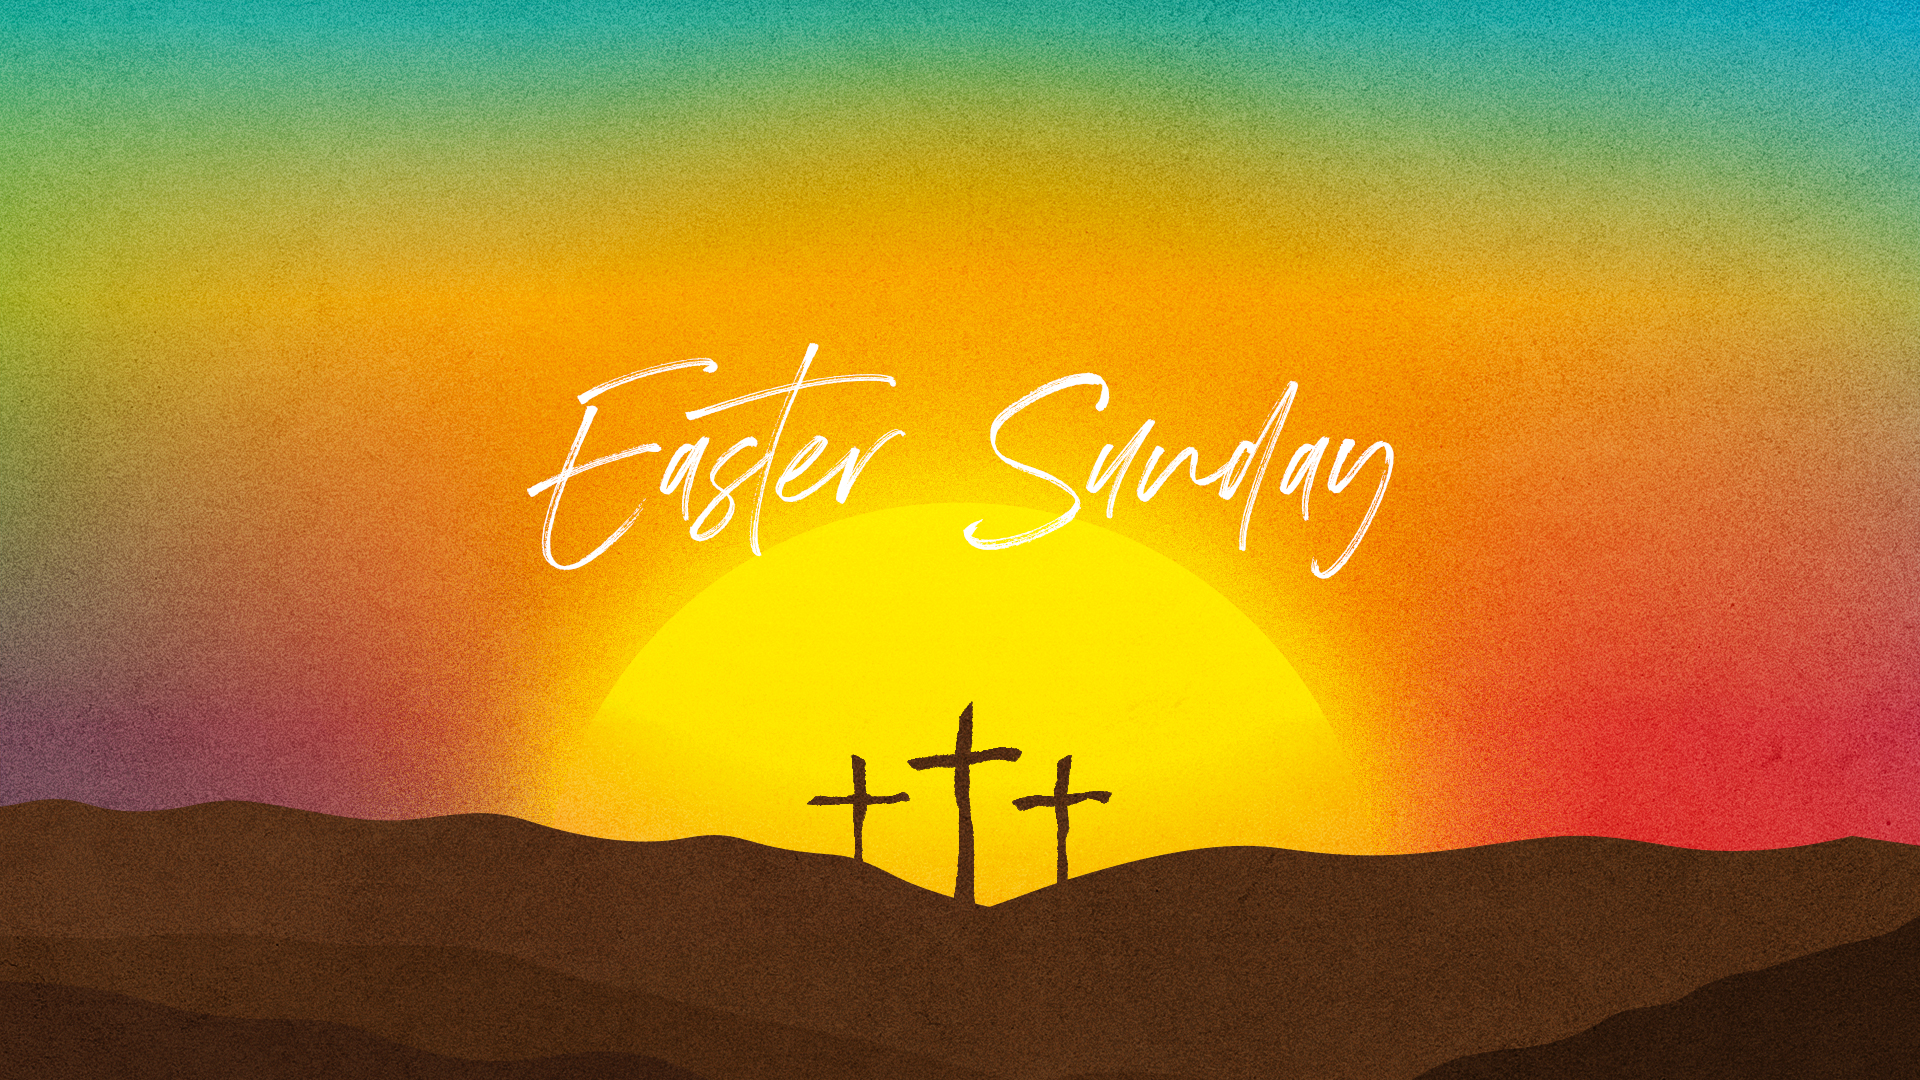 Easter Sunday graphic with three crosses in the background